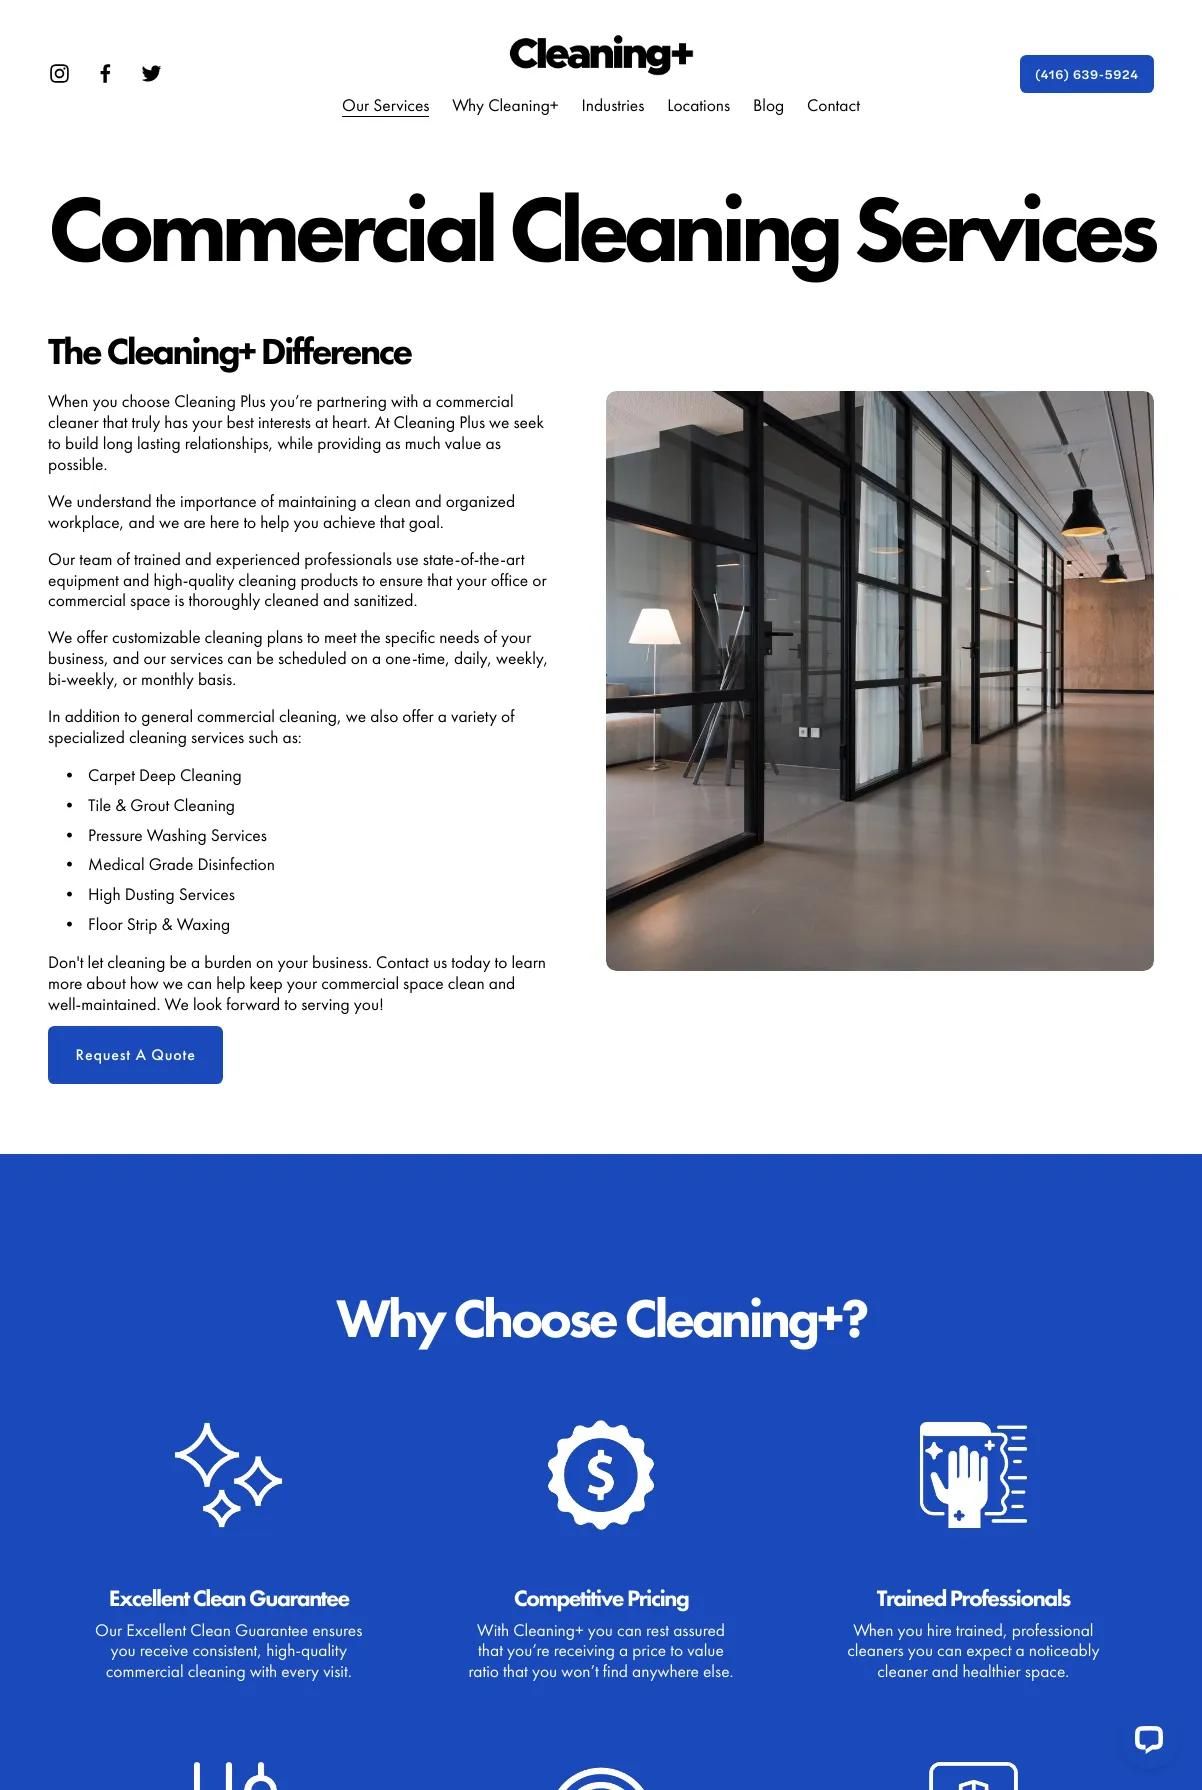 Screenshot 2 of Cleaning+ (Example Squarespace Cleaning Services Website)